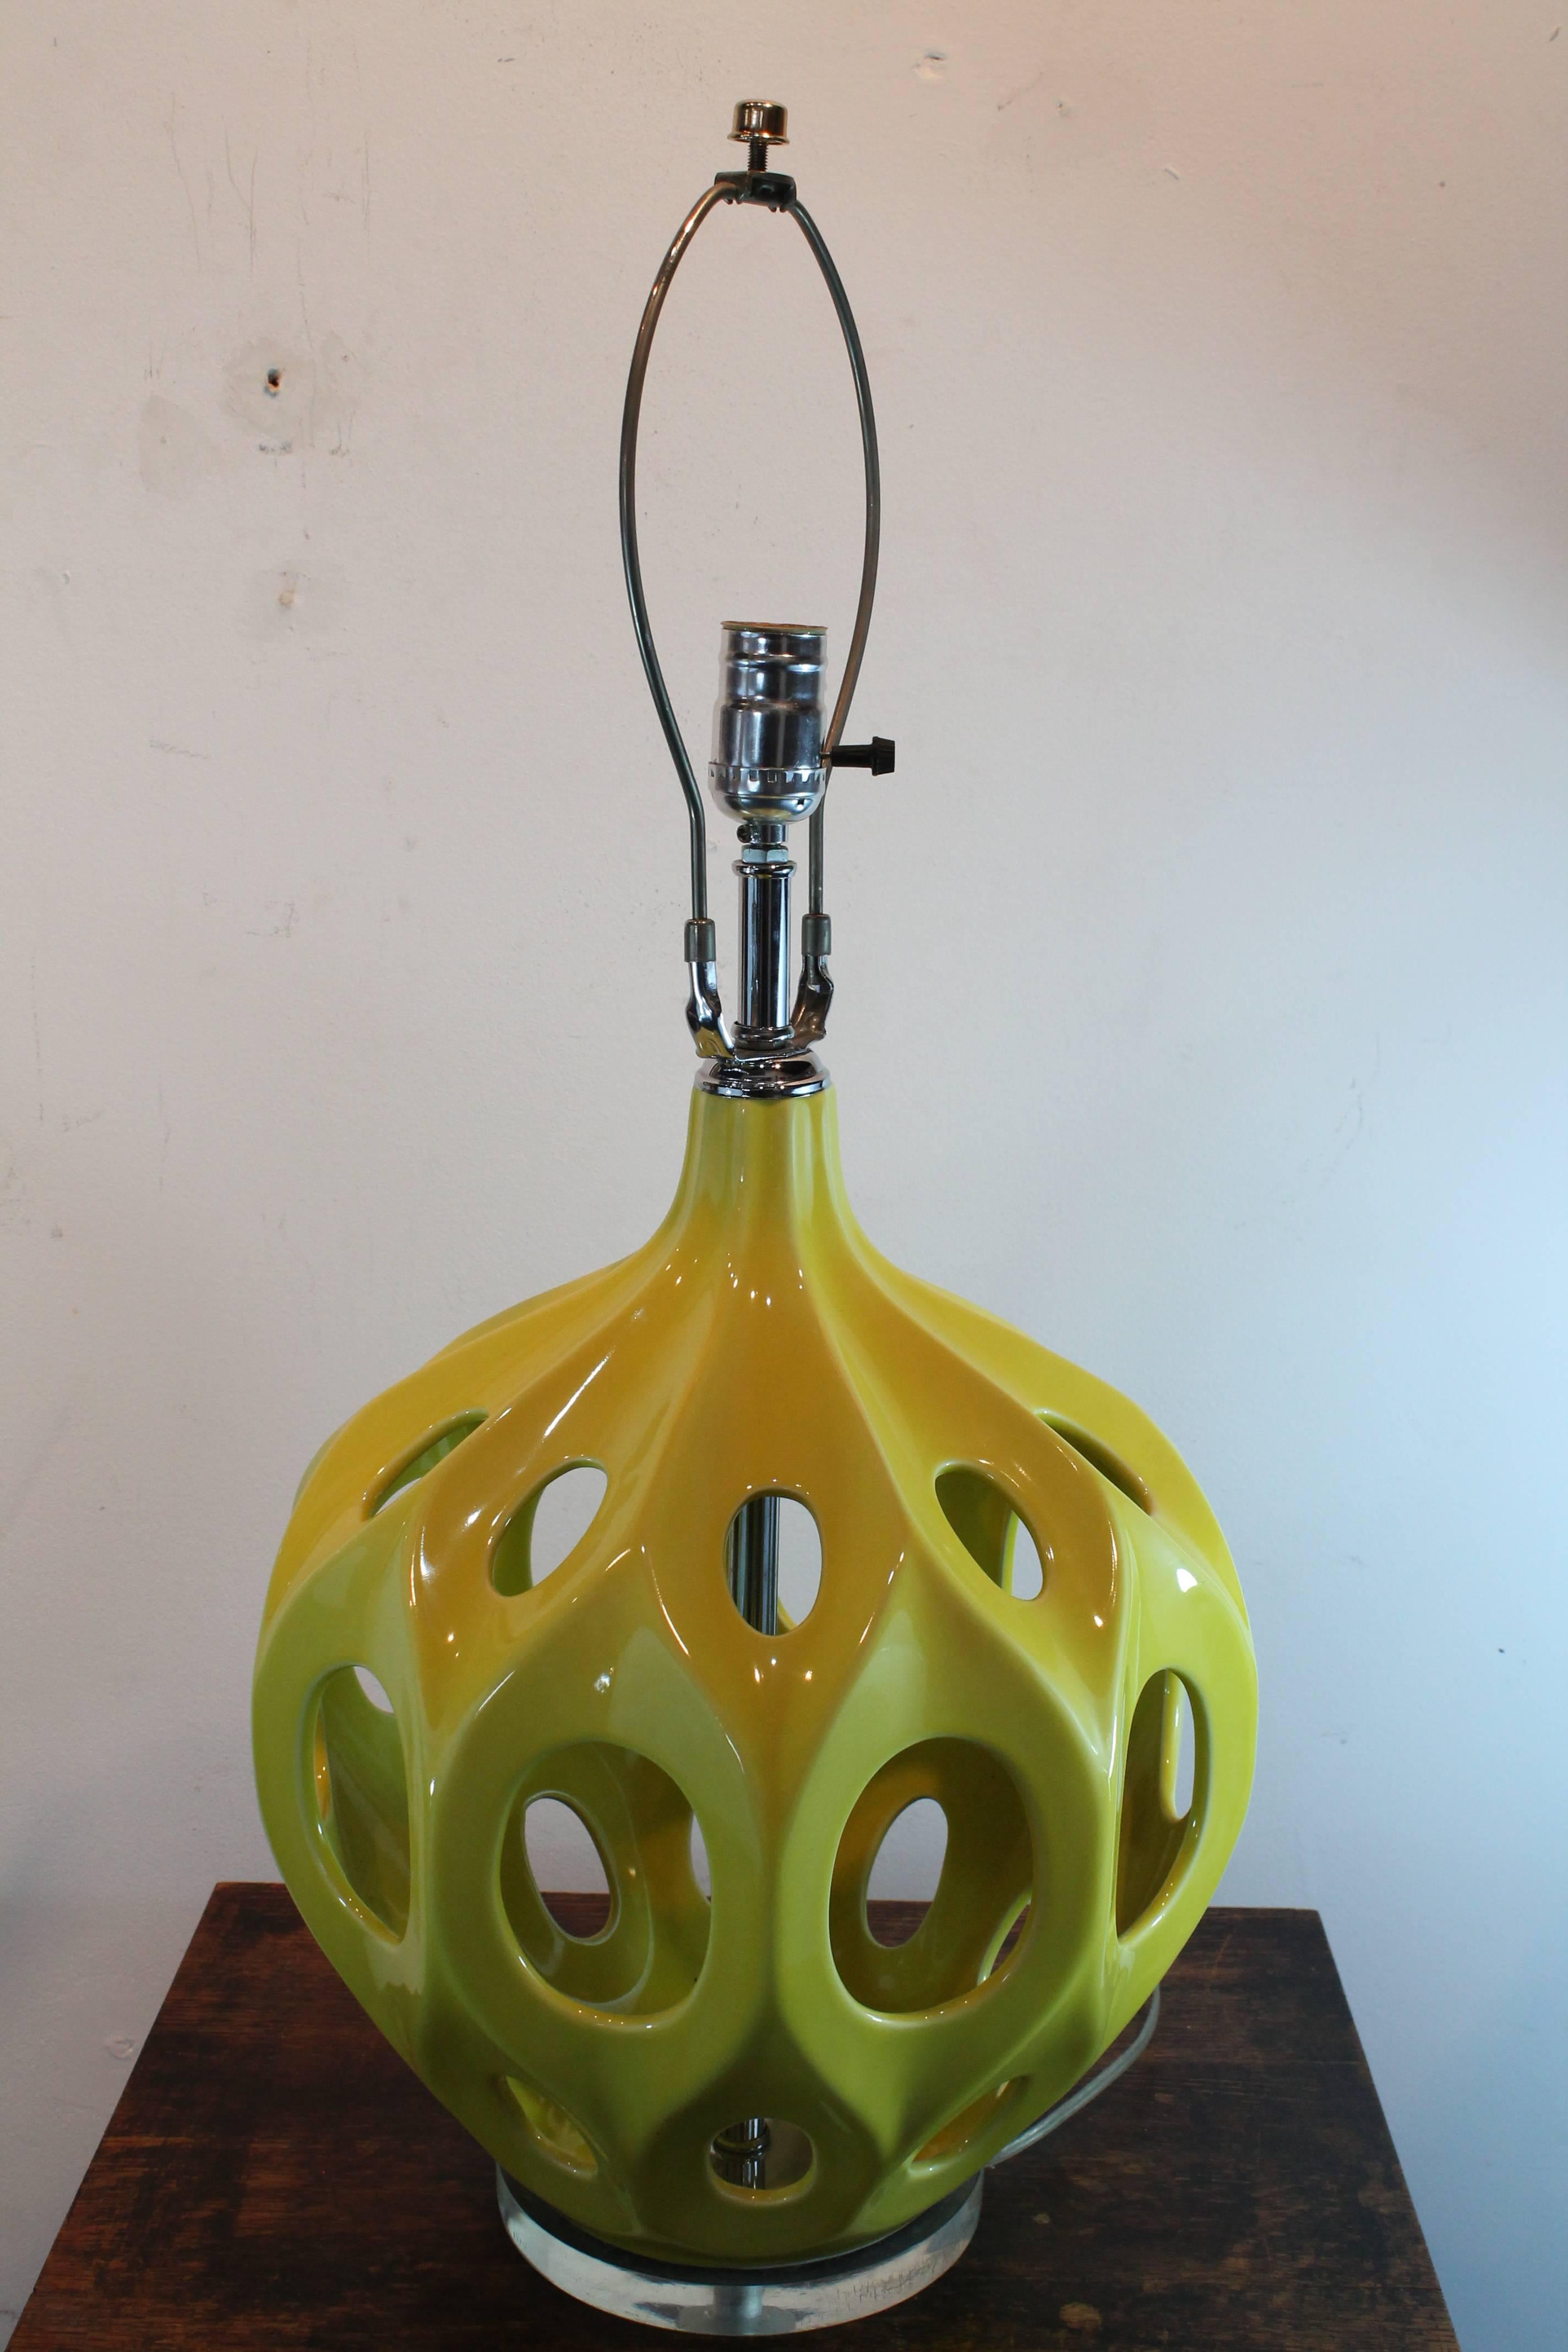 A pop of brilliant yellow on this glazed and pierced ceramic Modernist sculptural form table lamp. Sets on a Lucite base.
Shade not included.